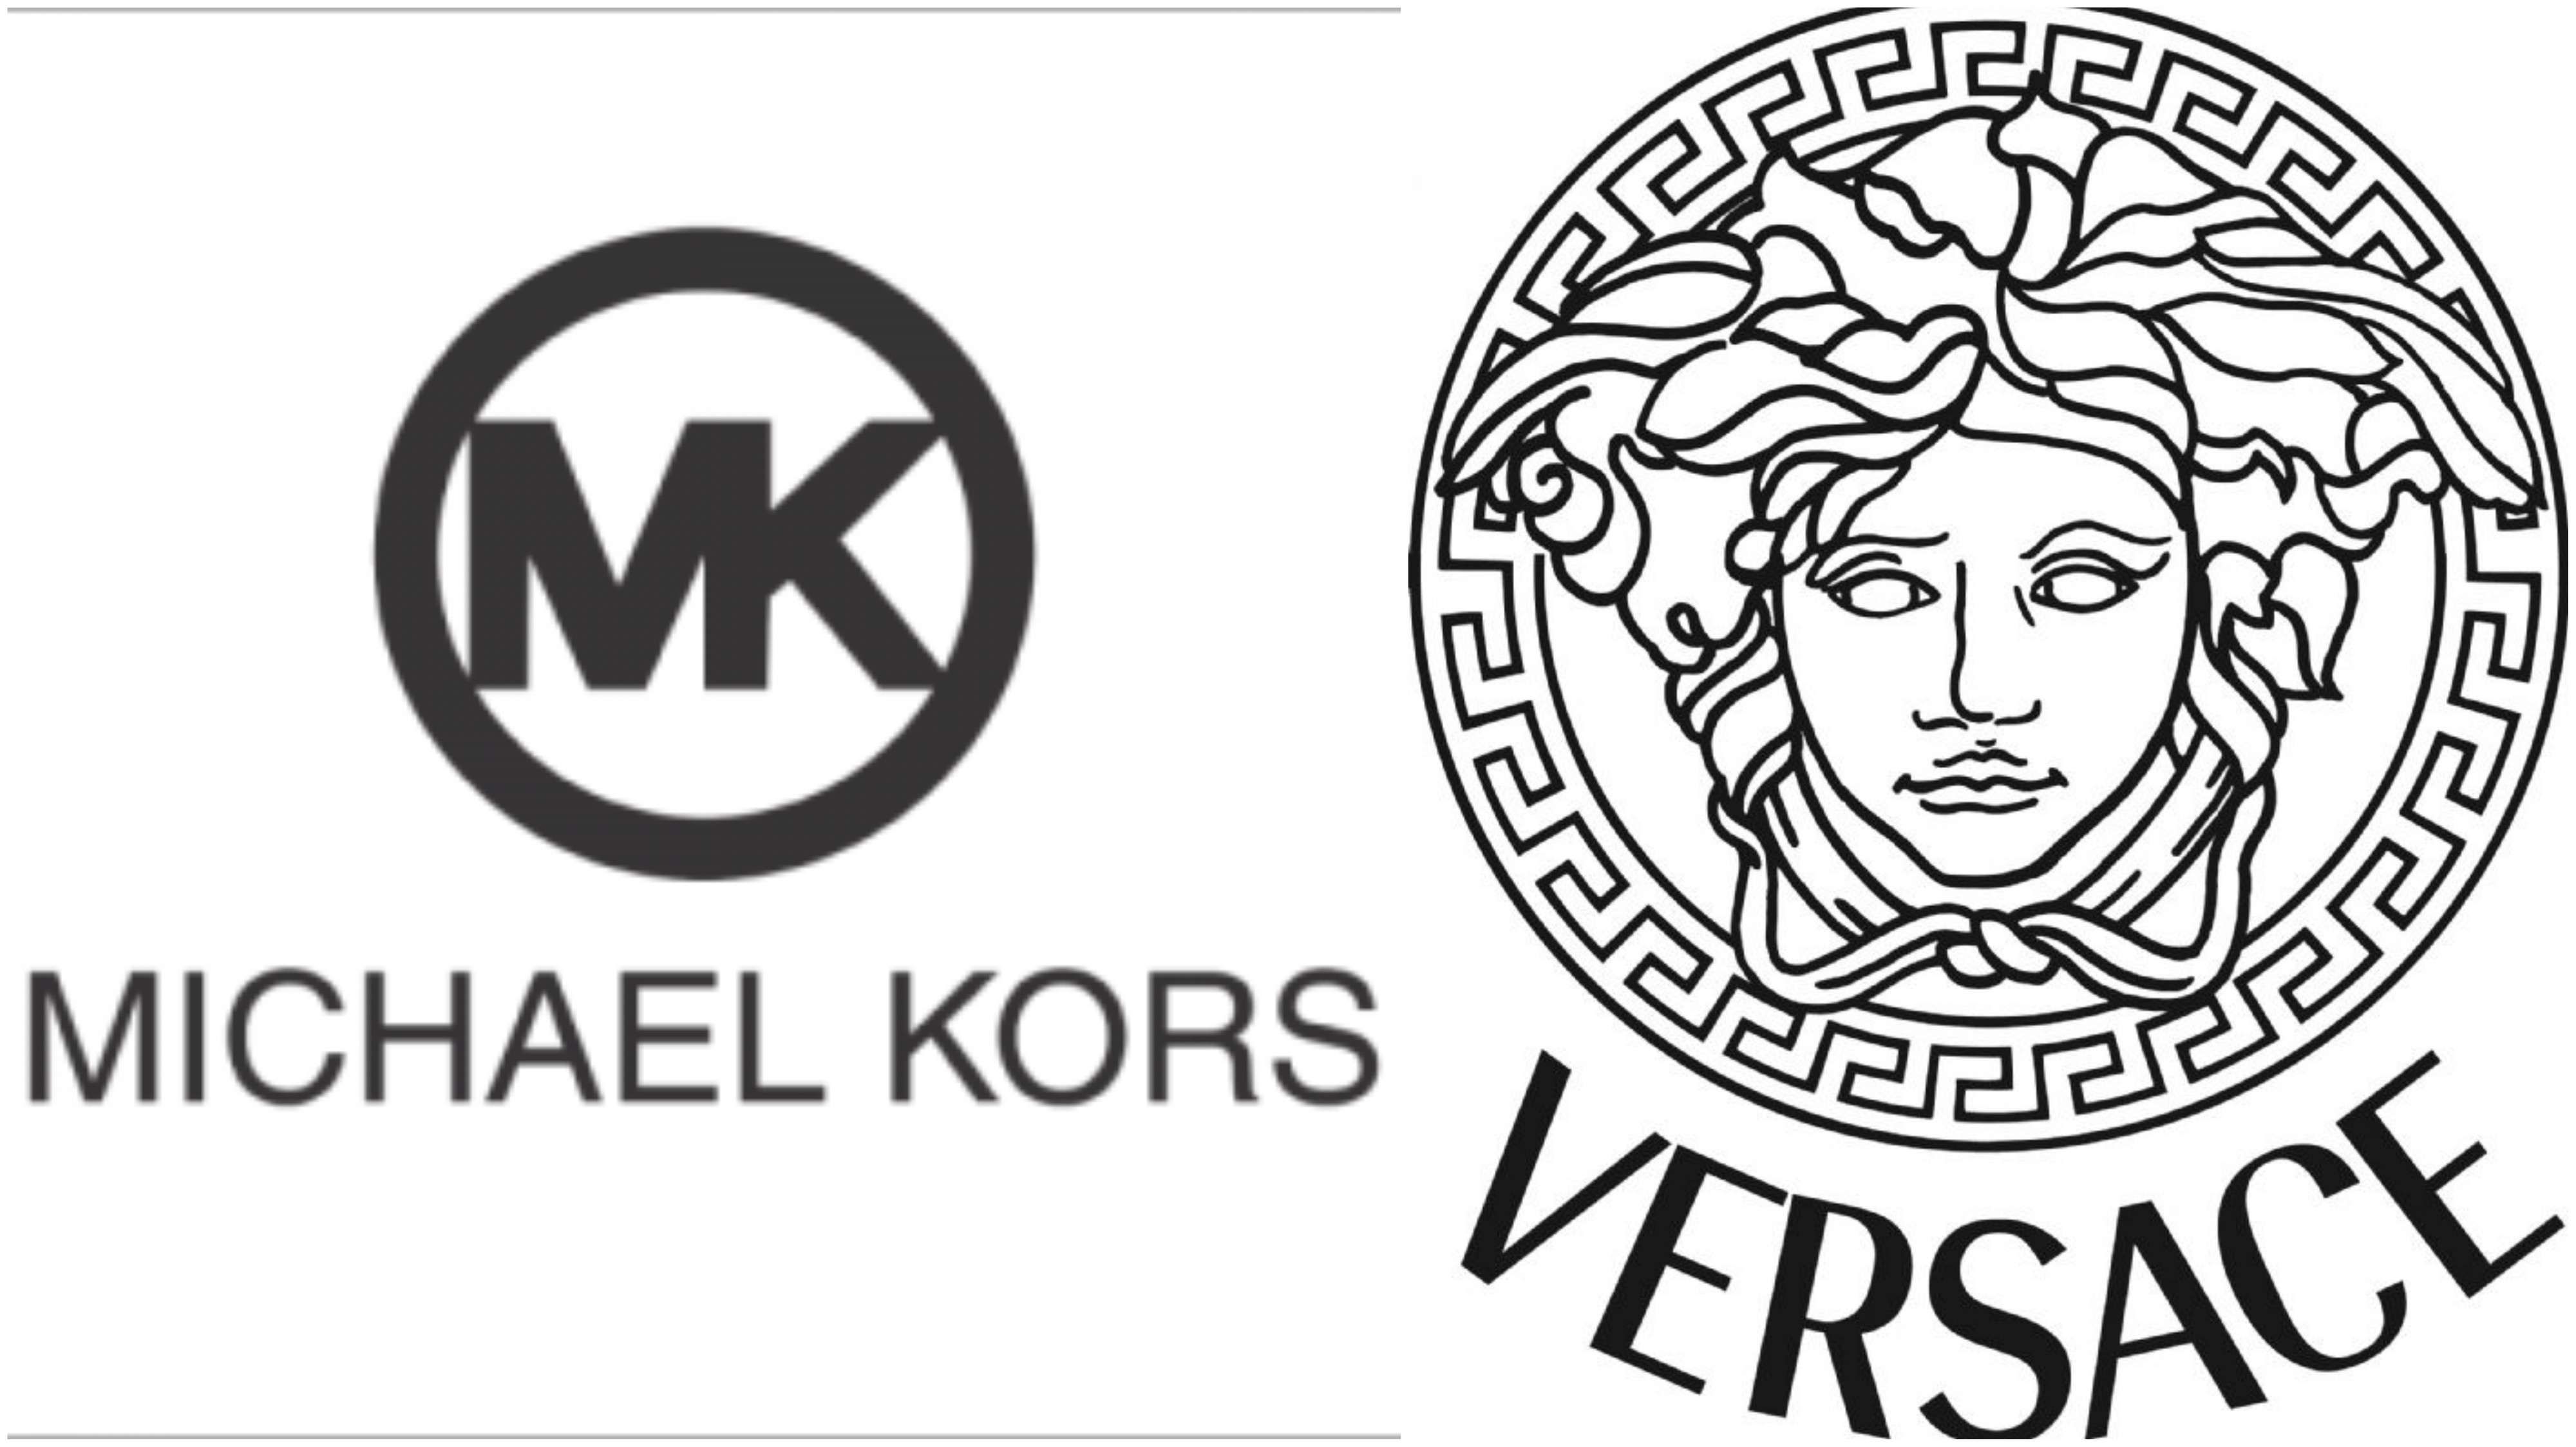 Michael Kors Has Officially Bought Versace For $ Billion & Fans Are  Angry! | JFW Just for women